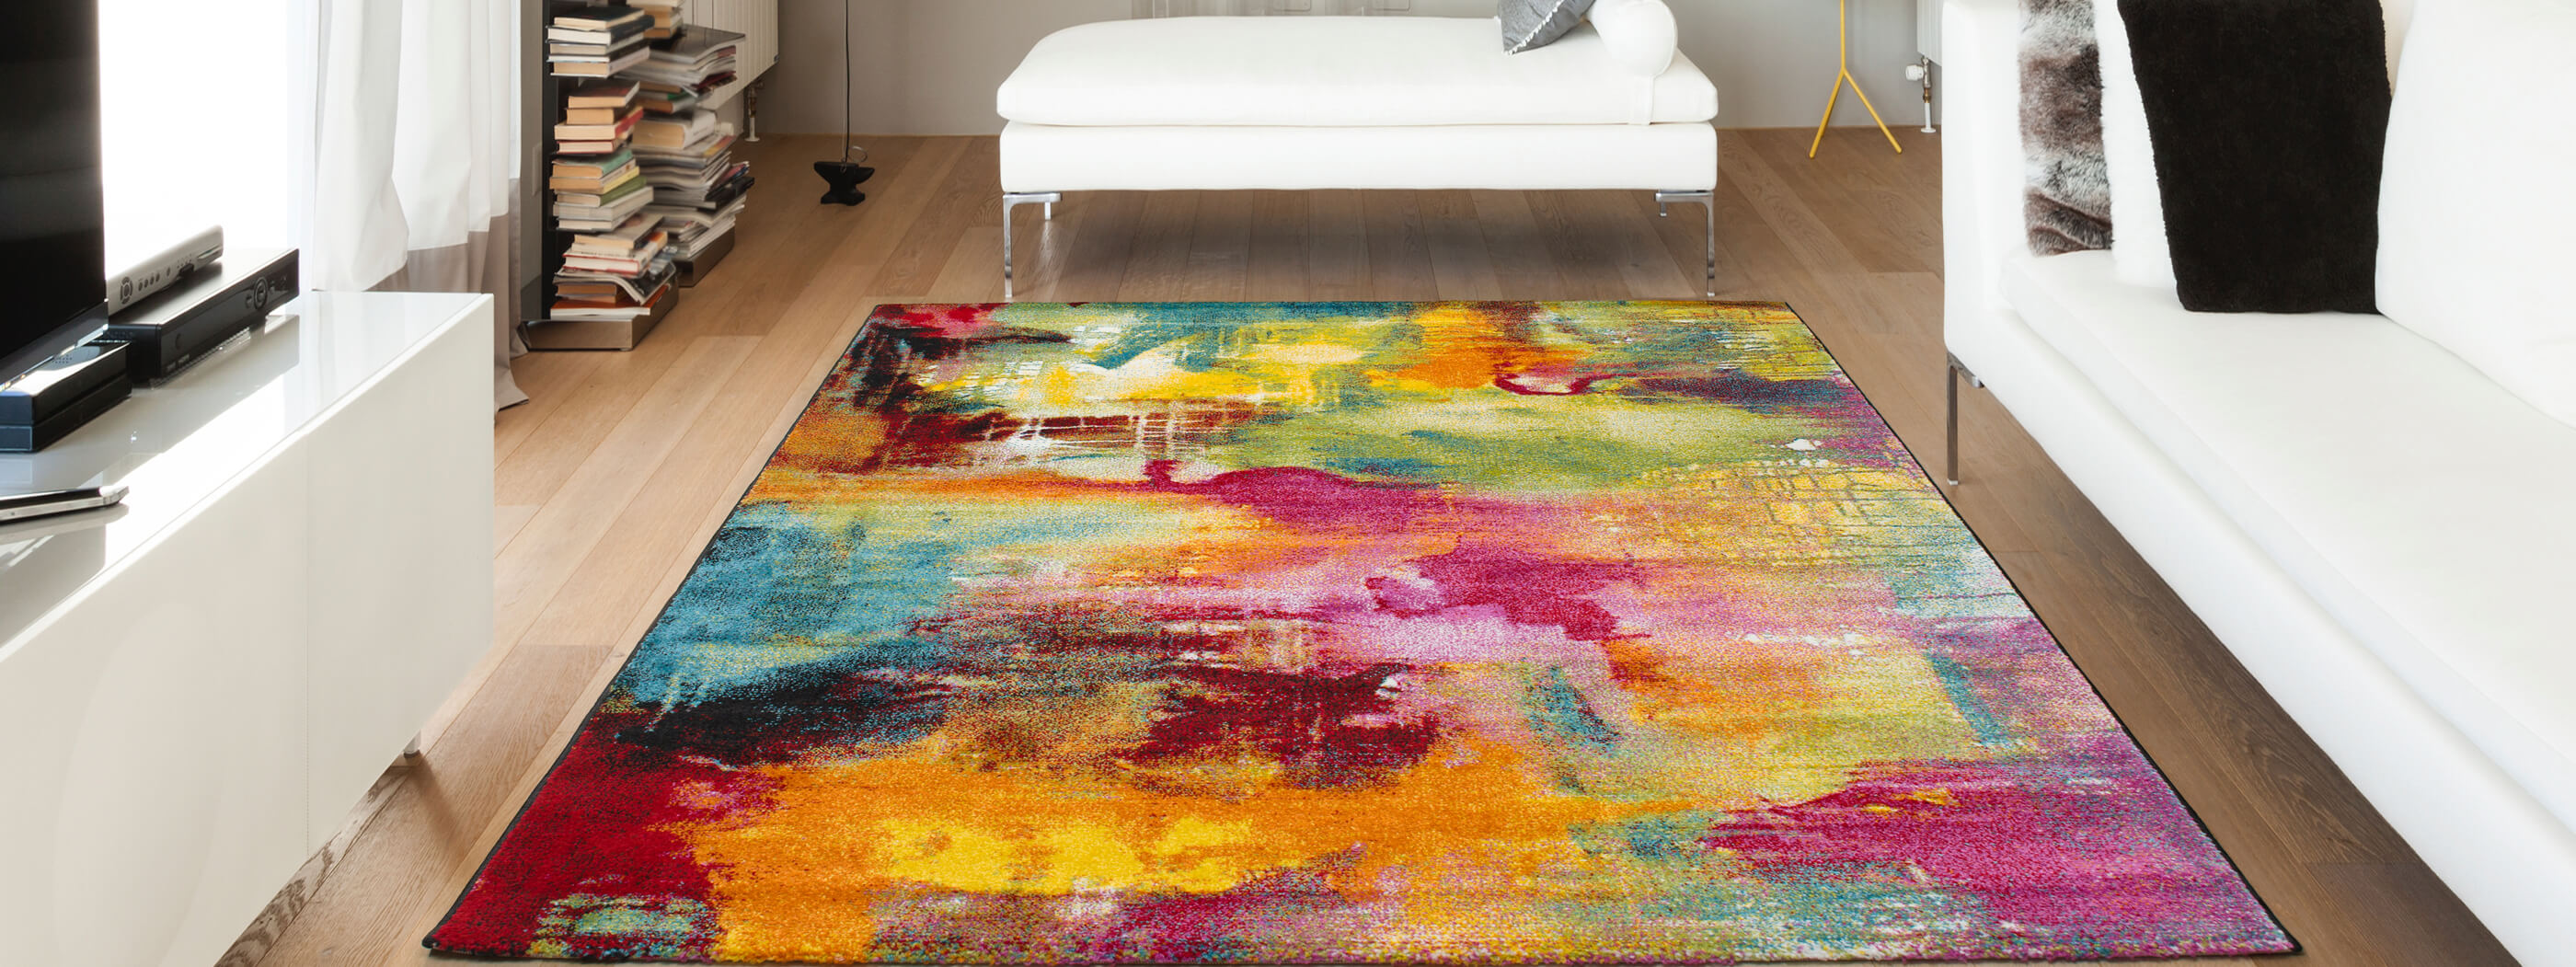 ABSTRACT ART RUGS